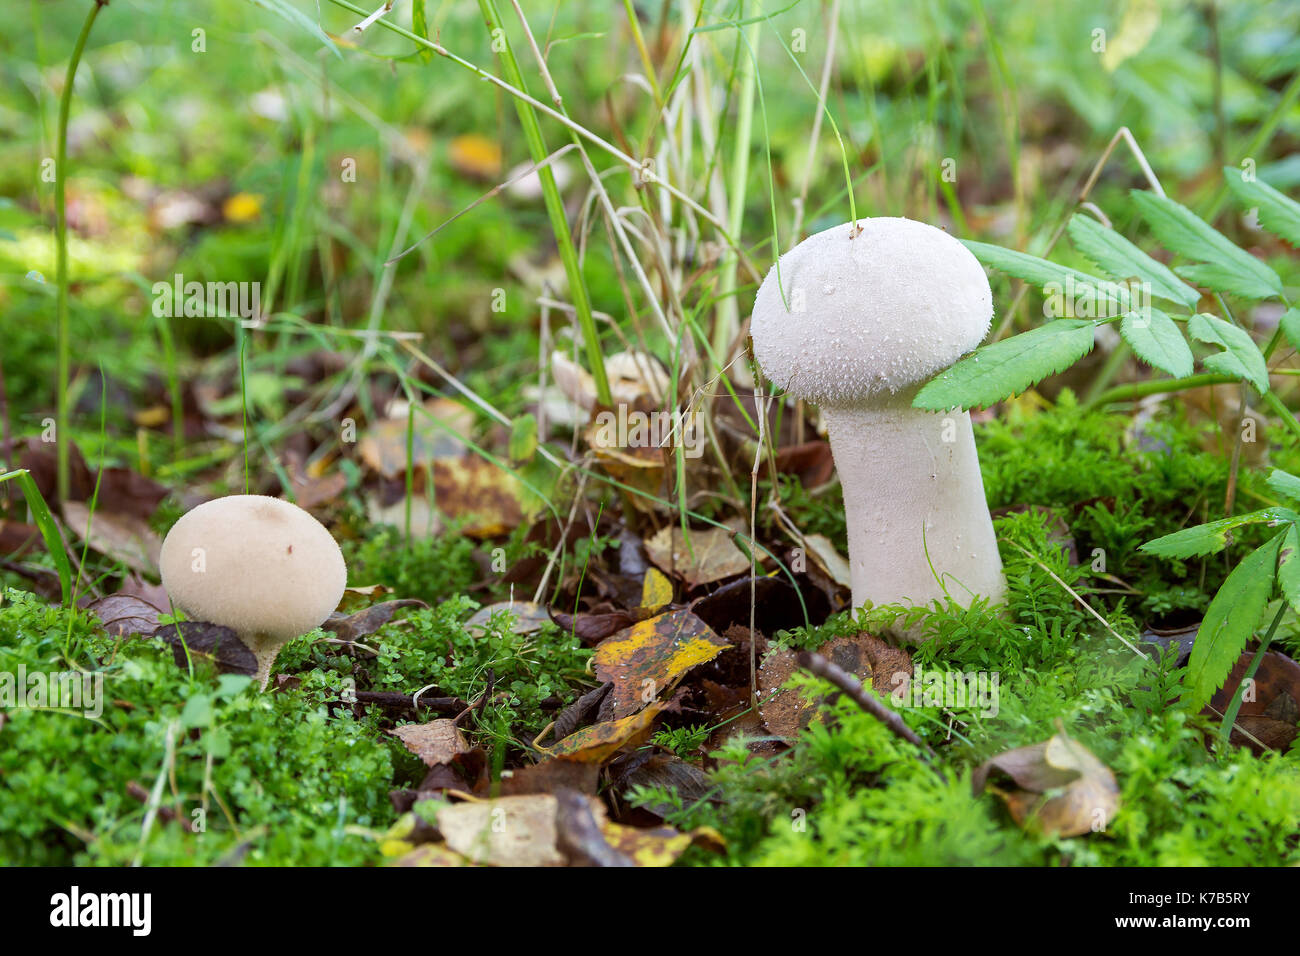 mushroom raincoat growing in the forest in autumn Stock Photo